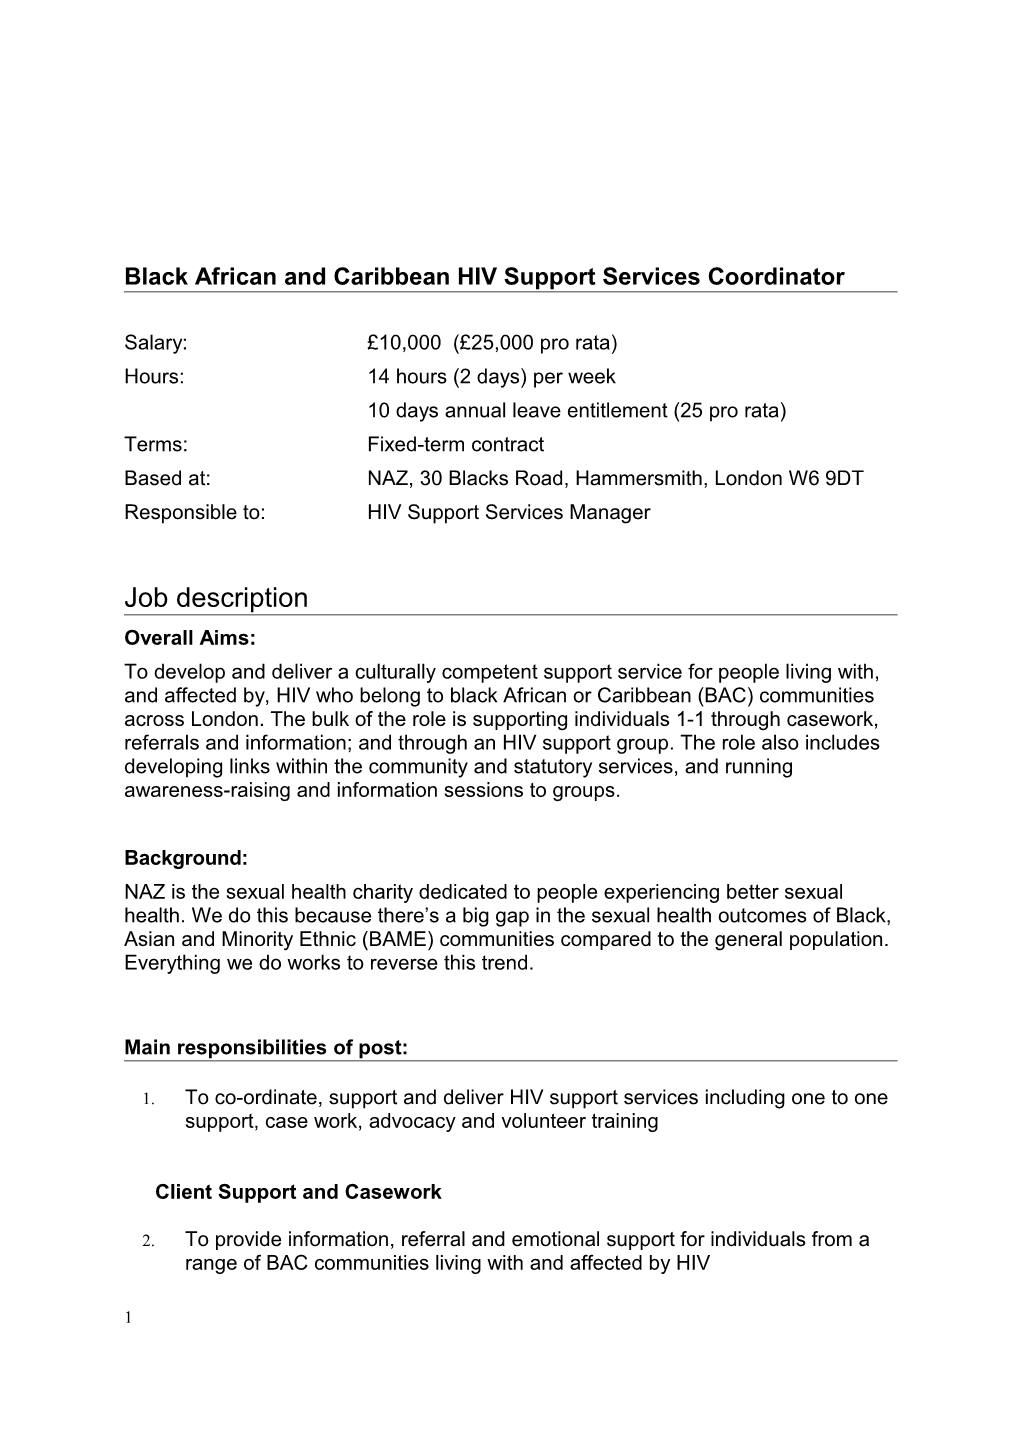 Black African and Caribbean HIV Support Services Coordinator